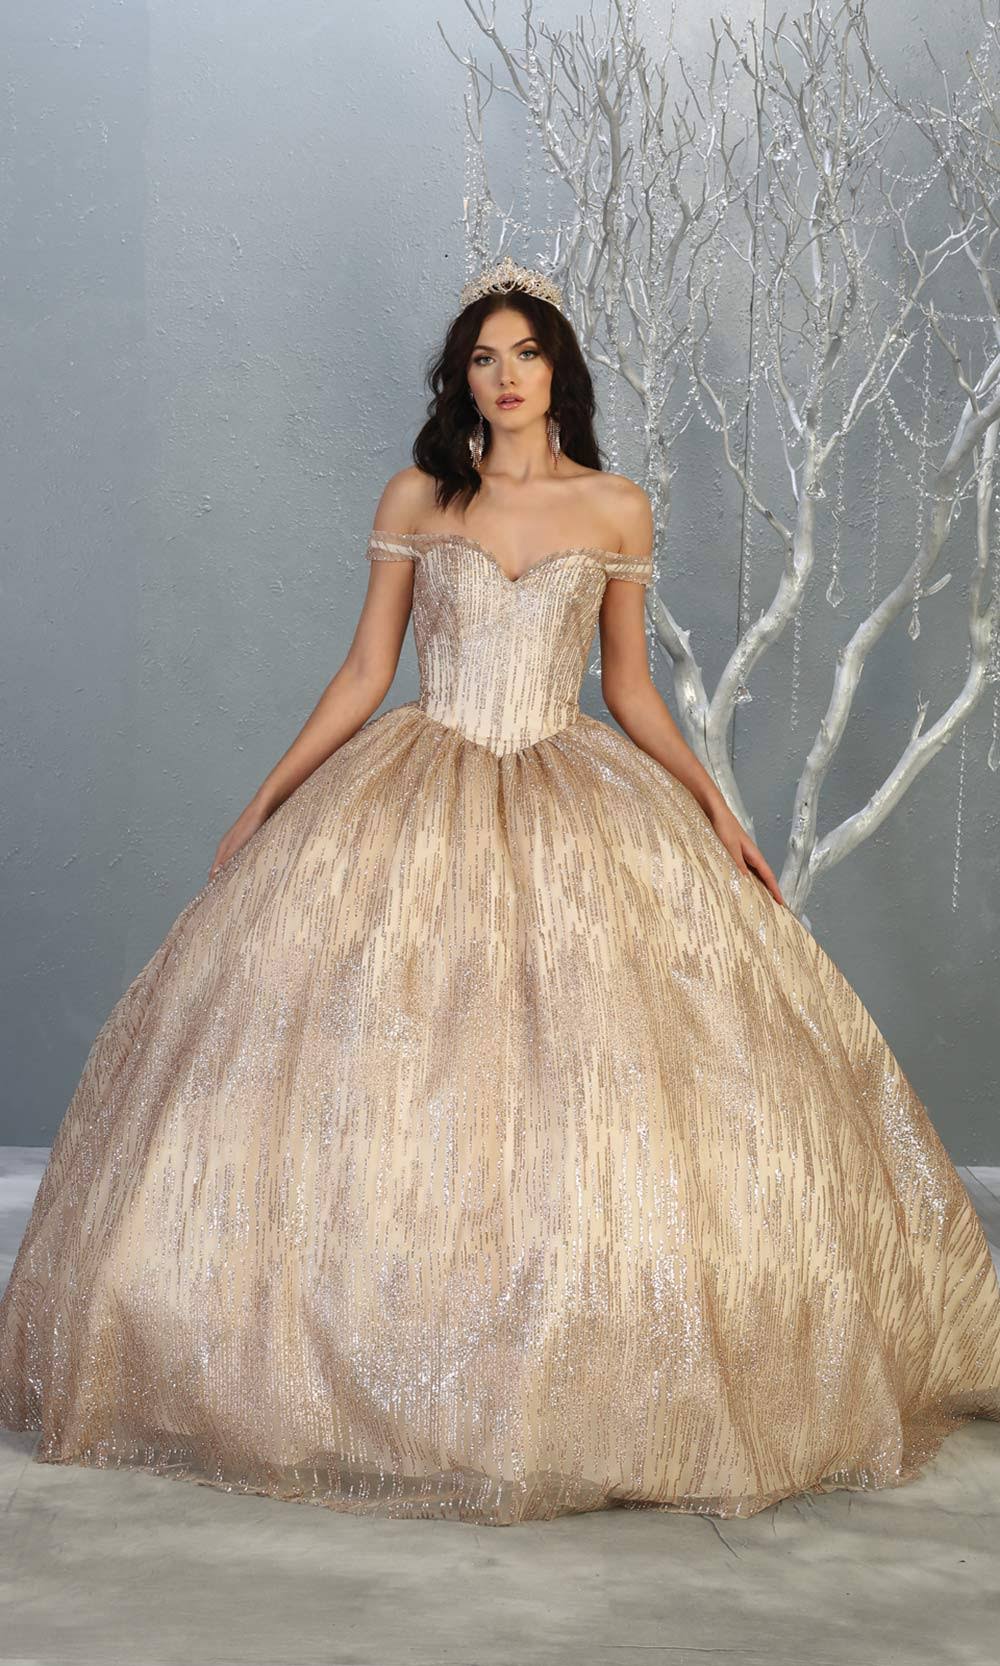 Mayqueen LK146 rose gold quinceanera off shoulder sequin ballgown. This rose gold shiny ball gown is perfect for engagement dress, wedding reception, indowestern party gown, sweet 16, debut, sweet 15, sweet 18. Plus sizes available for red ballgowns